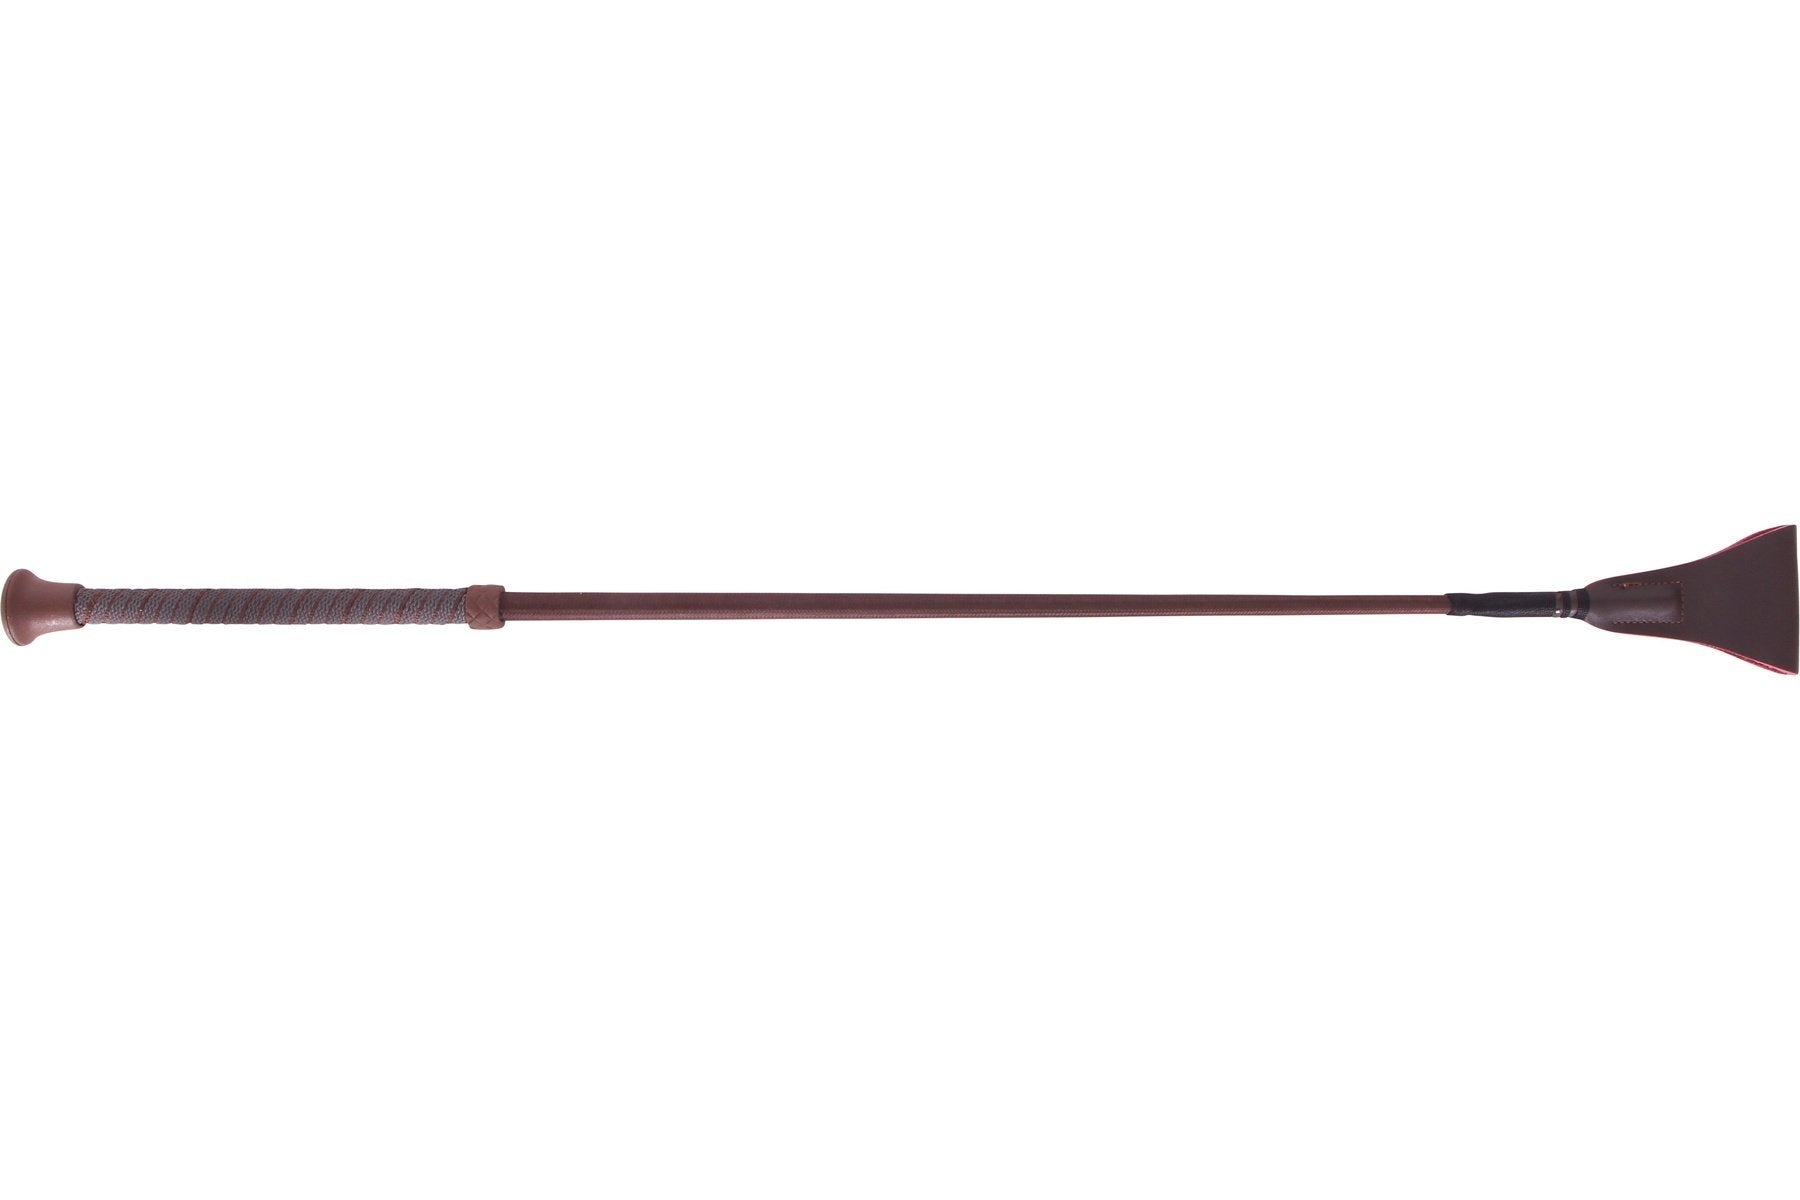 Fleck Riding Whip With Sure Grip Handle